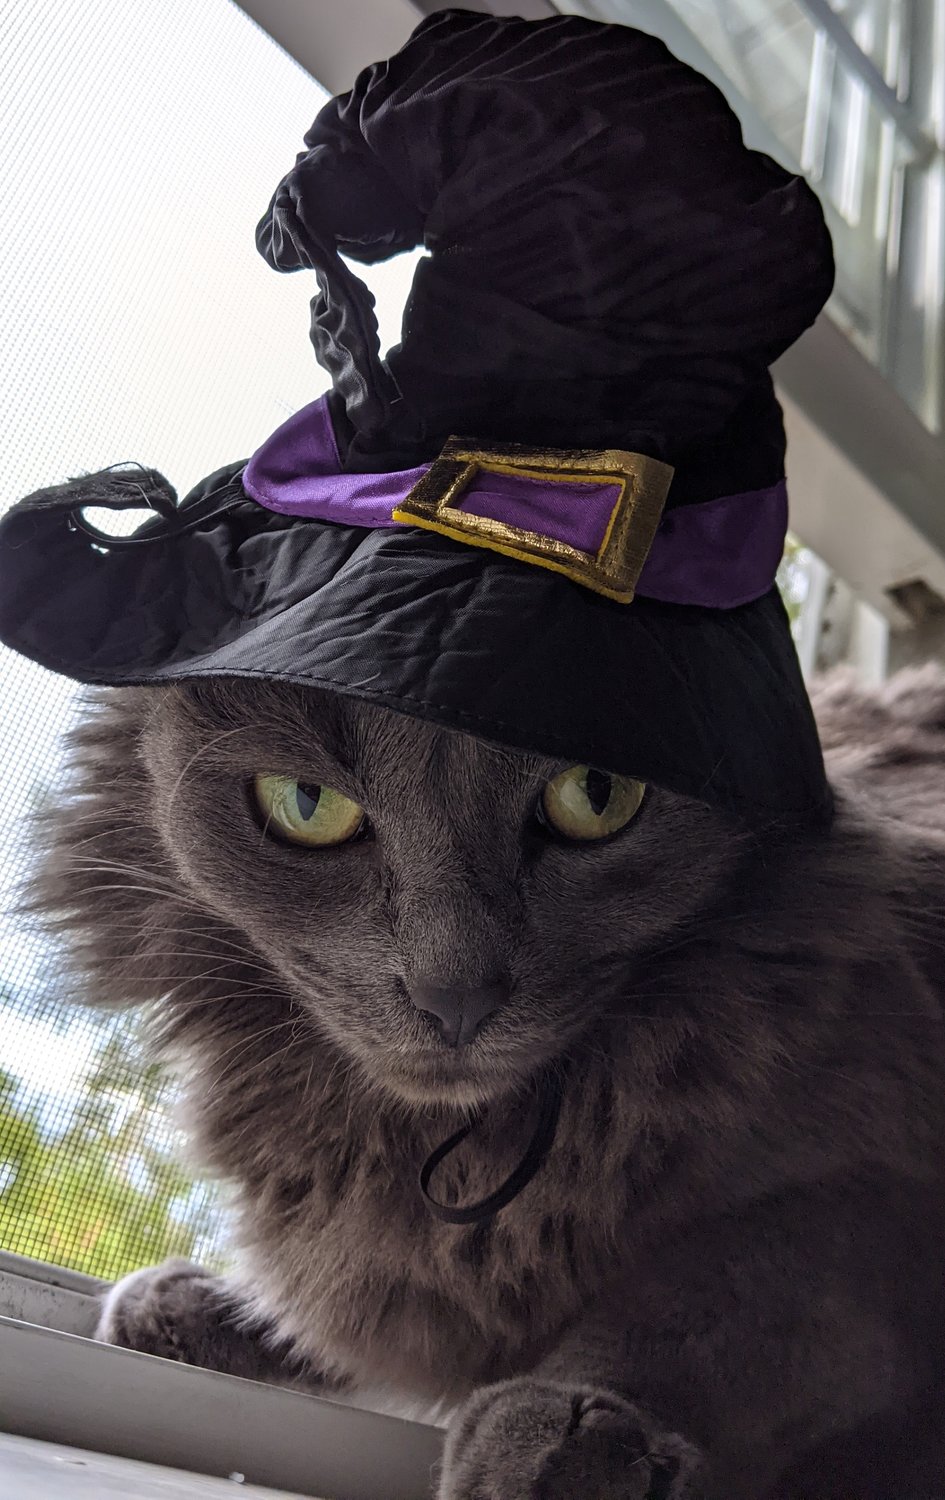 SPOOKY MUFFIN's favorite holiday is Halloween and she loves to dress up. She's so funny! Muffins is five years old and has a big brother named Tiddles.